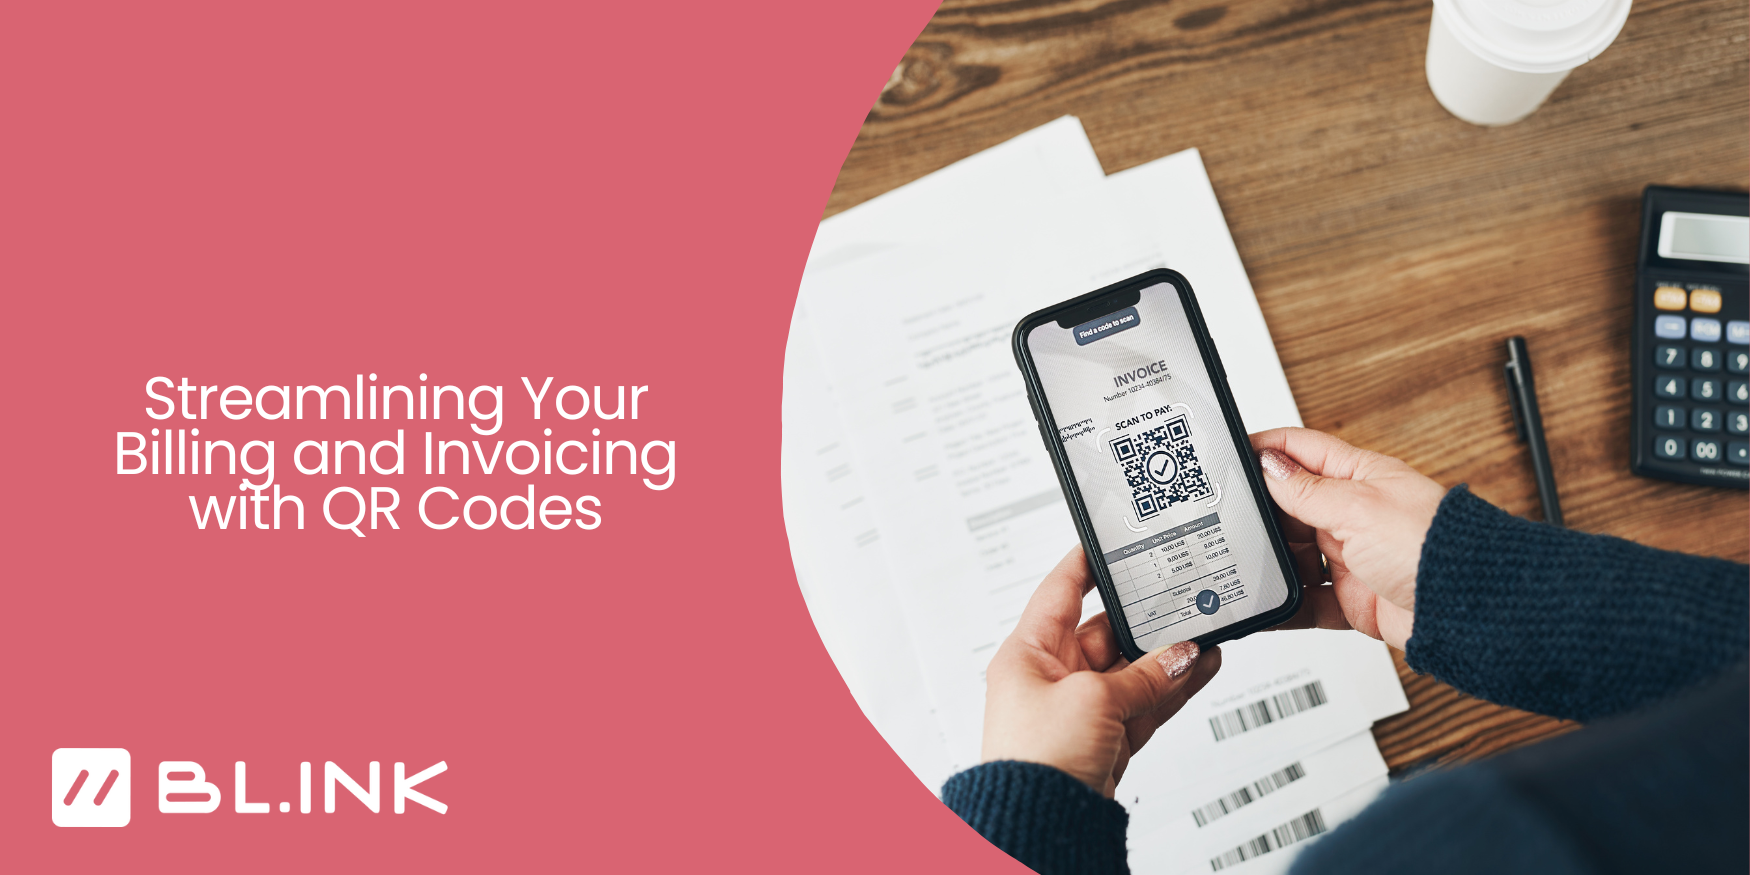 Streamlining Your Billing and Invoicing with QR Codes